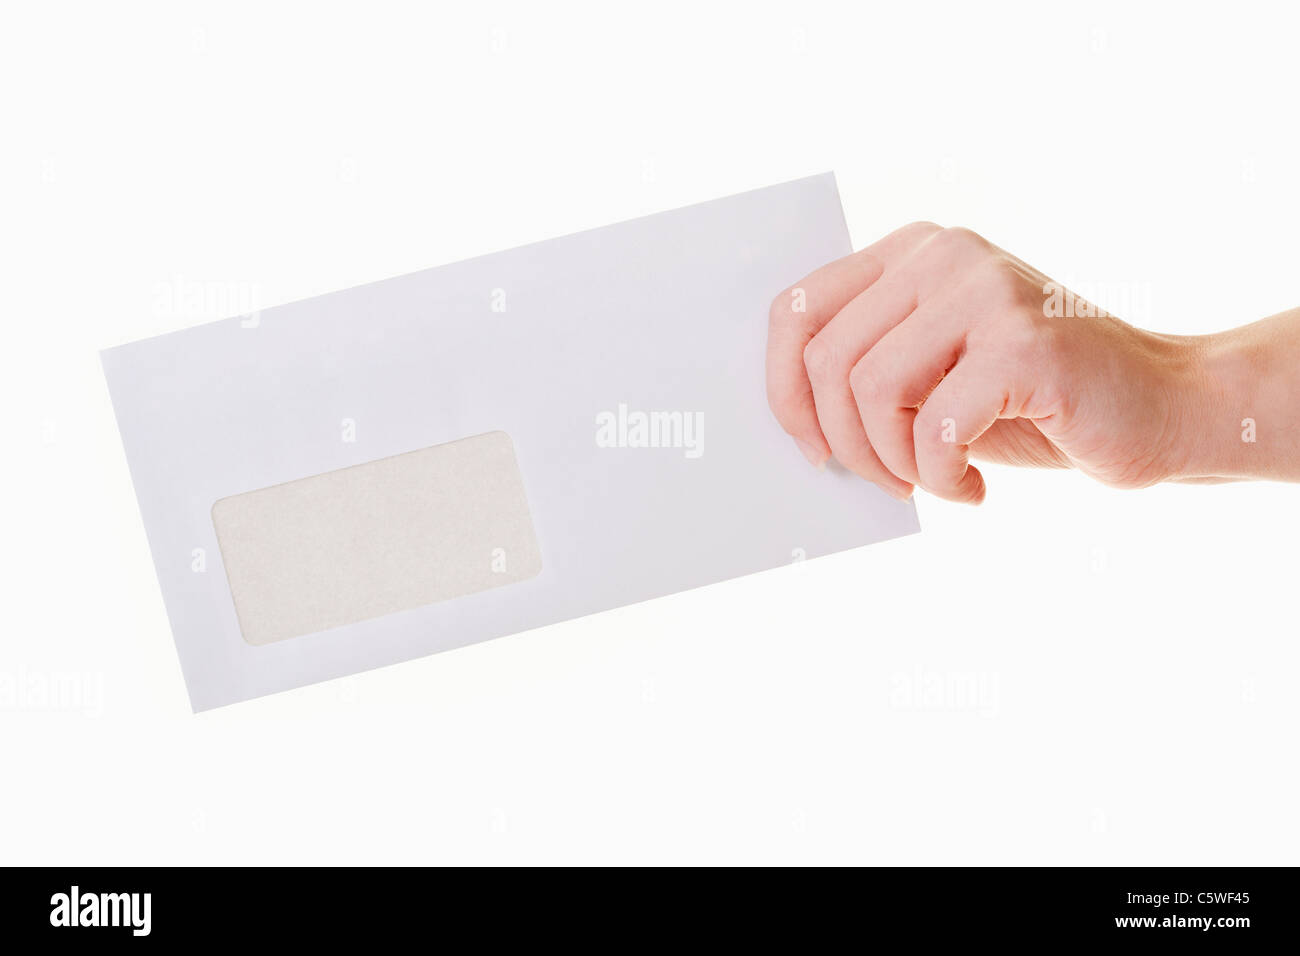 Hand of woman holding blank envelope against white background, close up Stock Photo